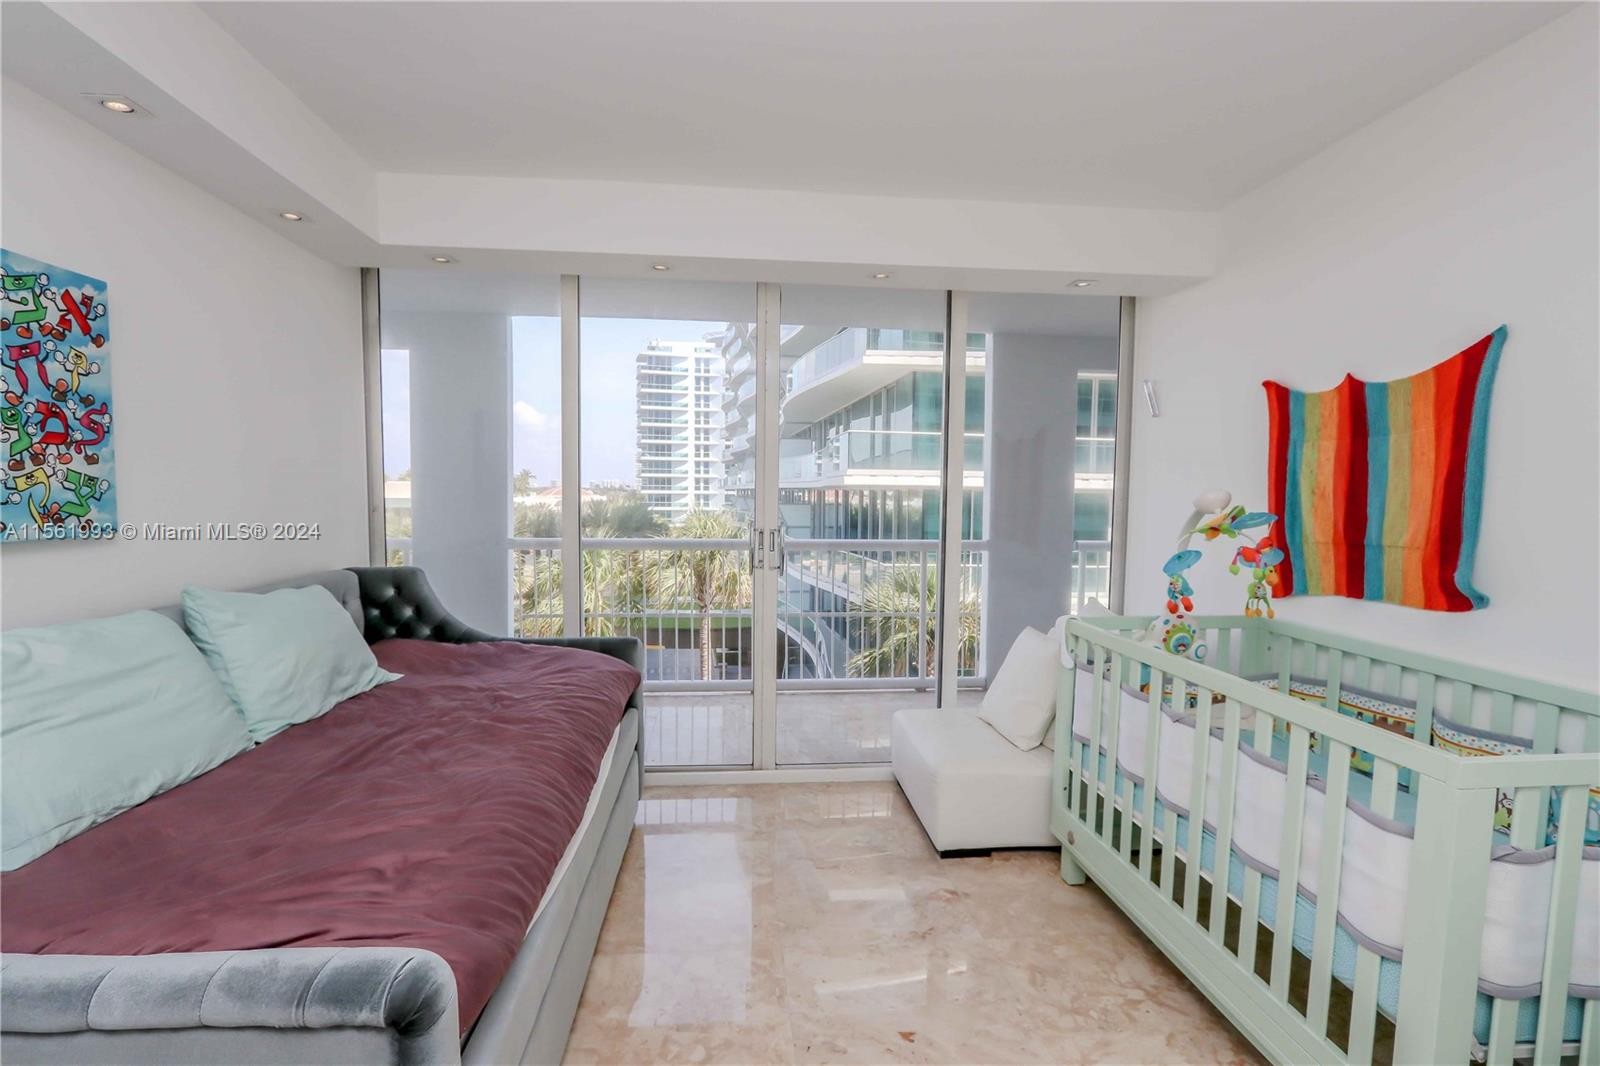 43. 9341 Collins Ave